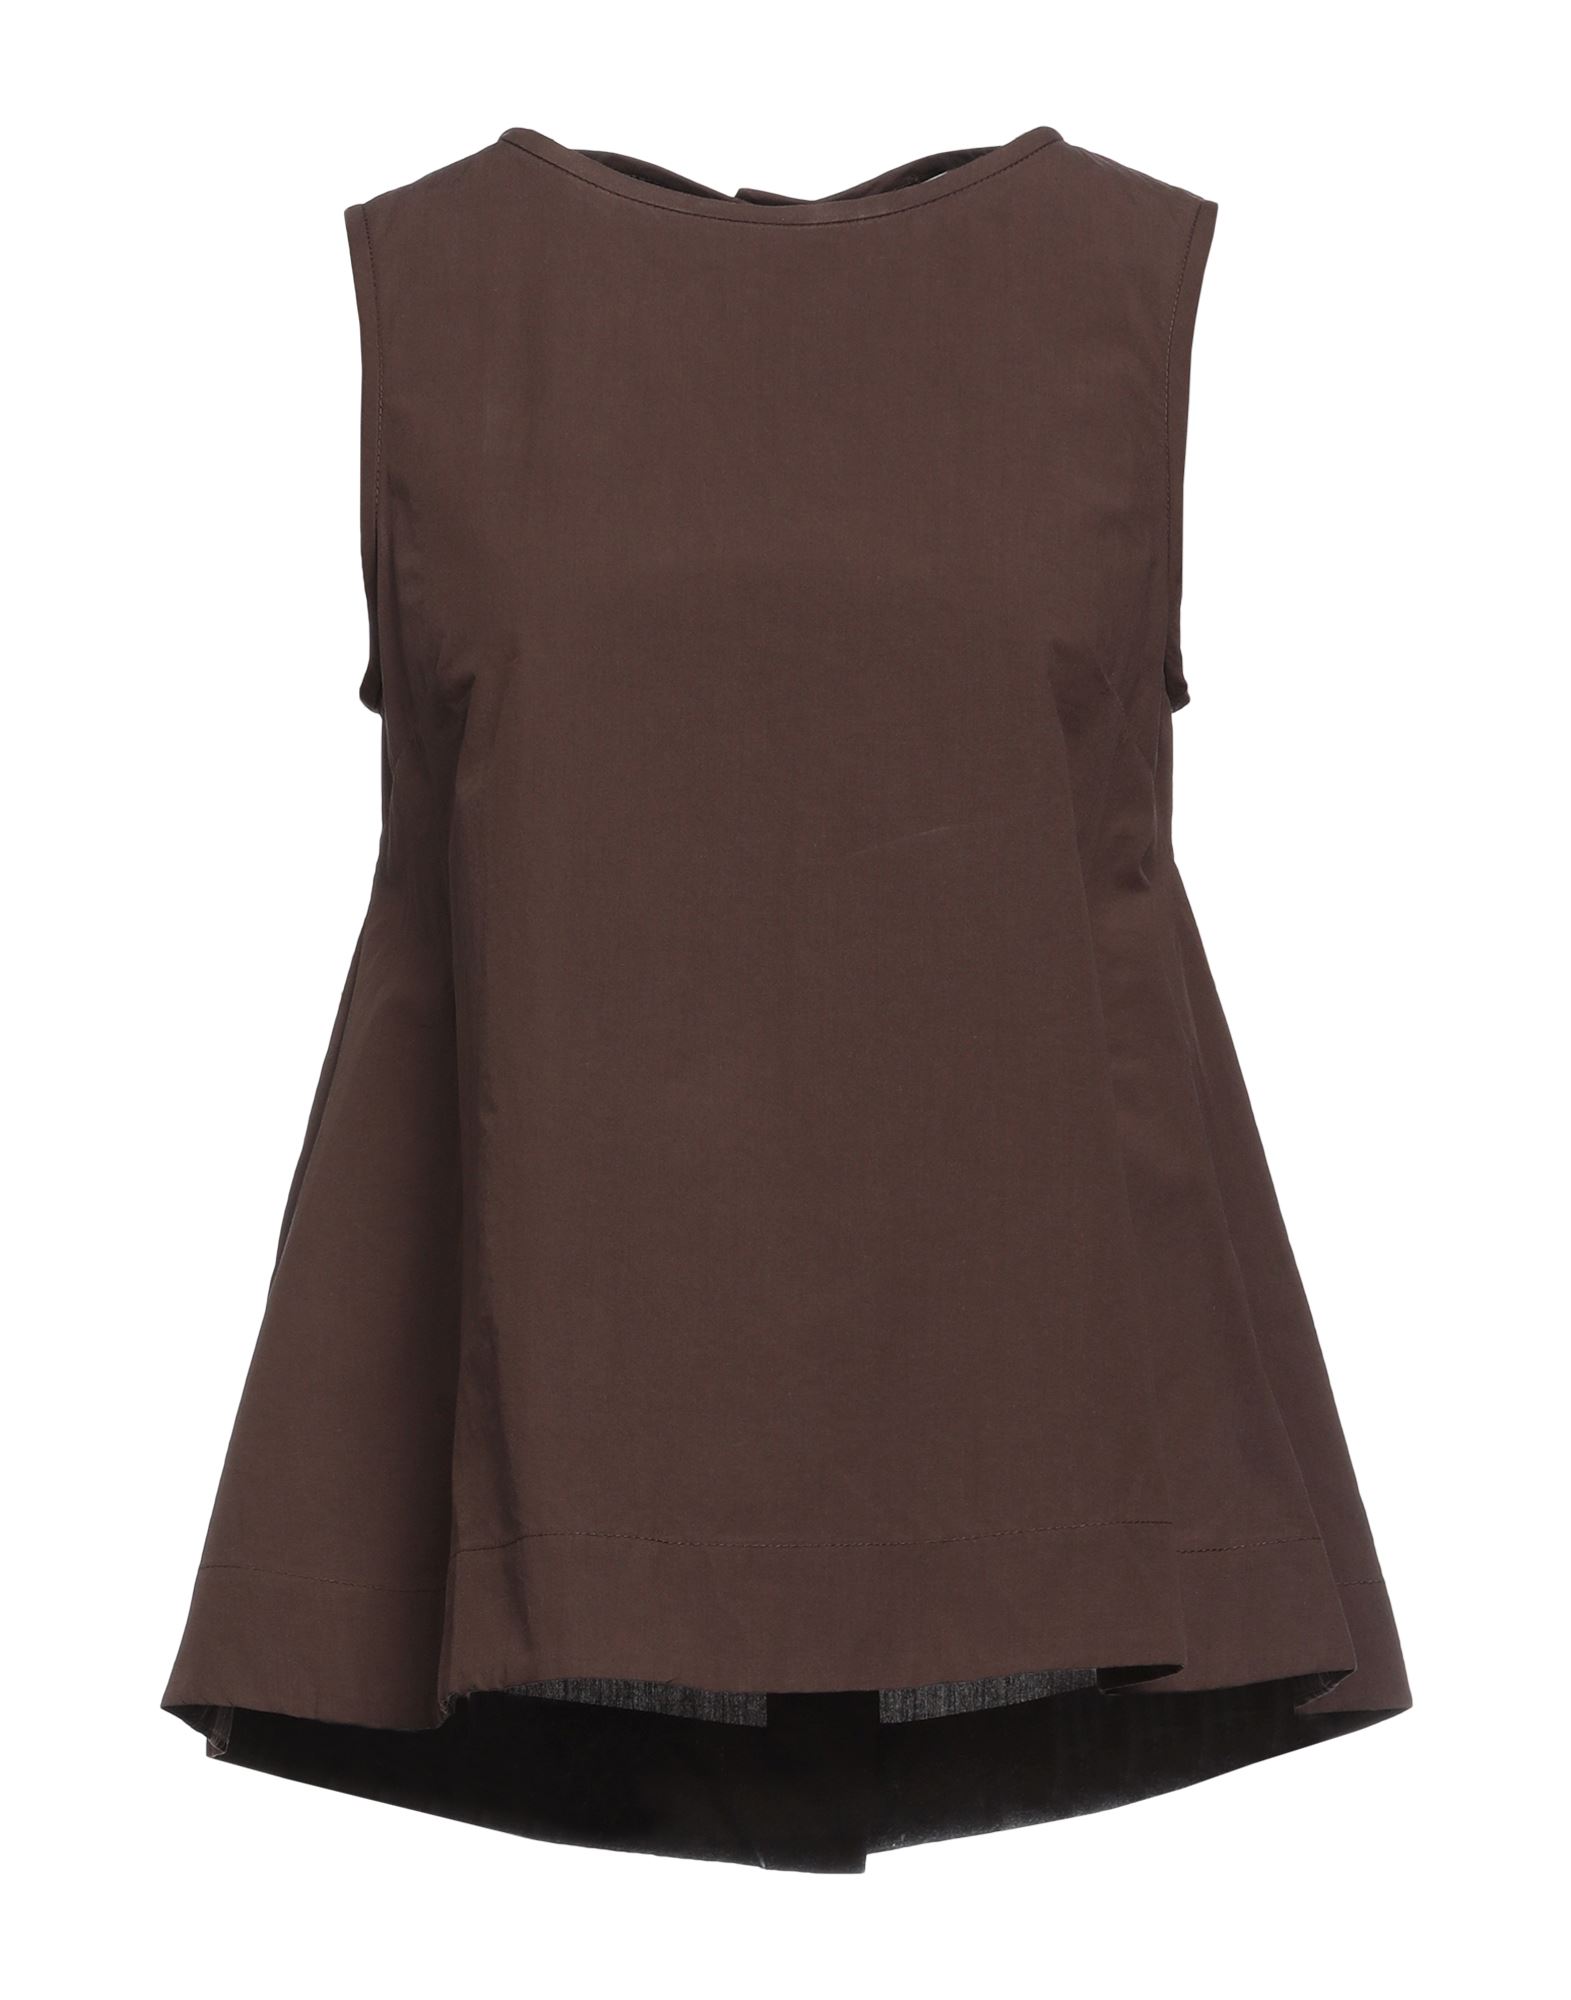 Ottod'ame Woman Top Cocoa Size 2 Cotton In Brown